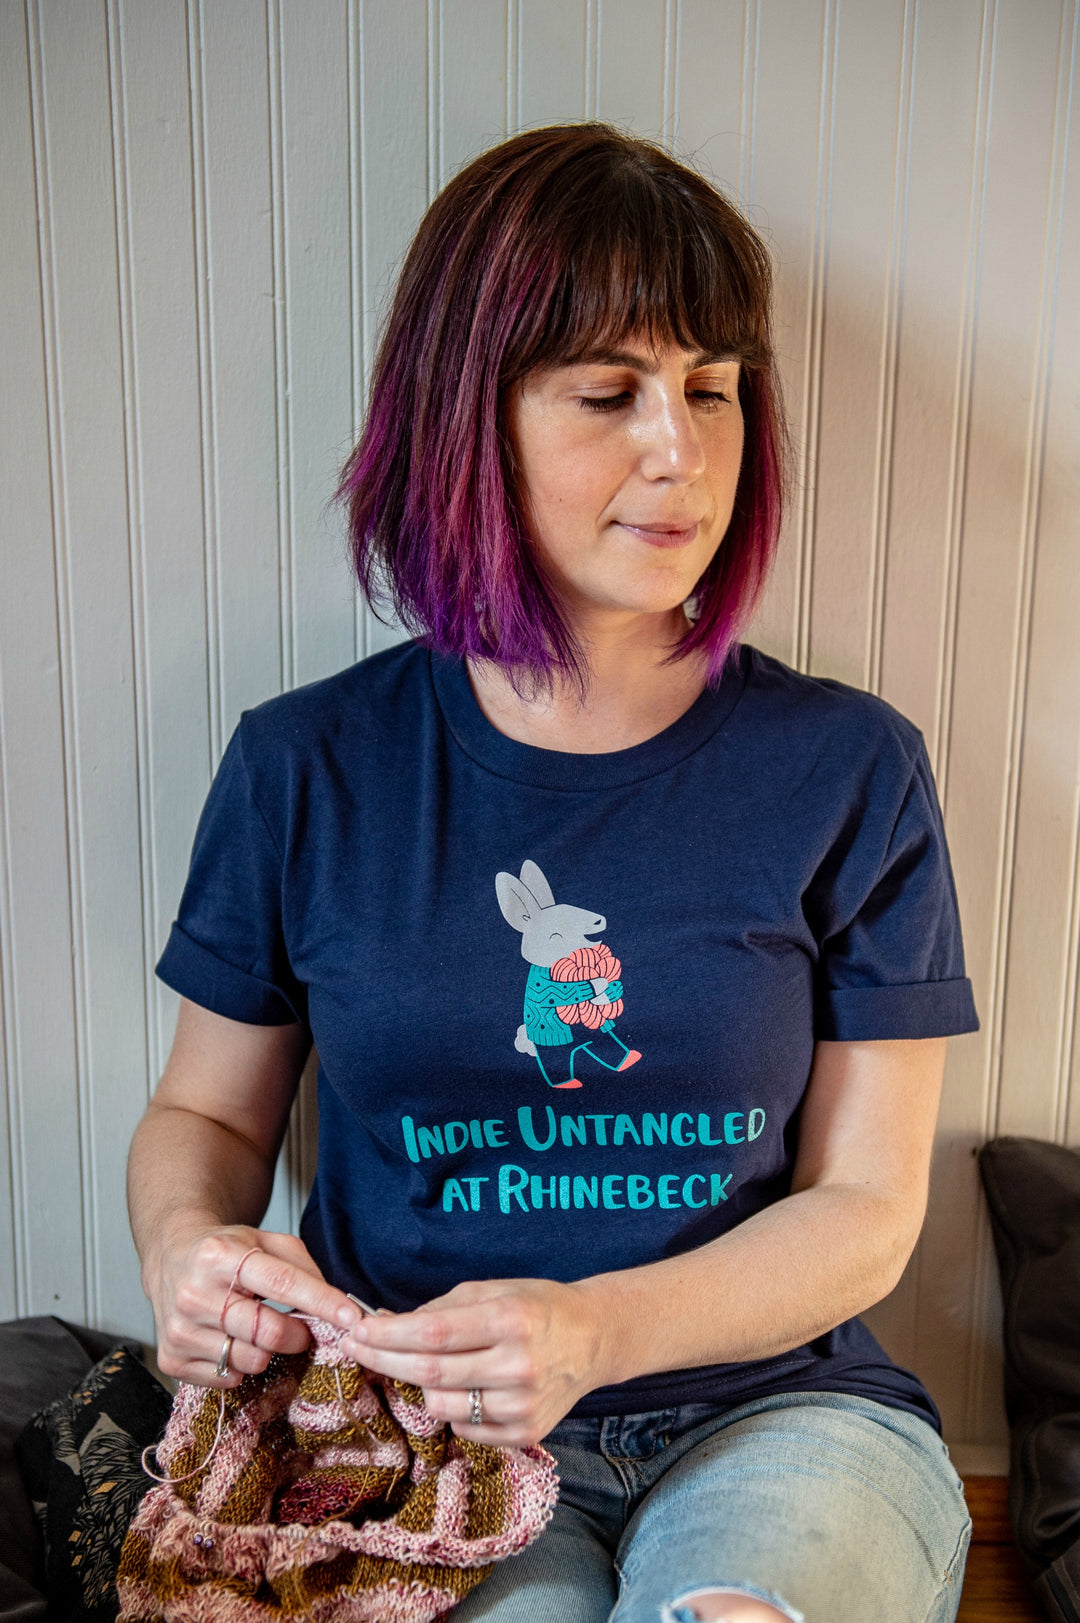 A white woman wears a navy t-shirt with an illustration of a bunny clutching coral yarn and the words Indie Untangled At Rhinebeck.